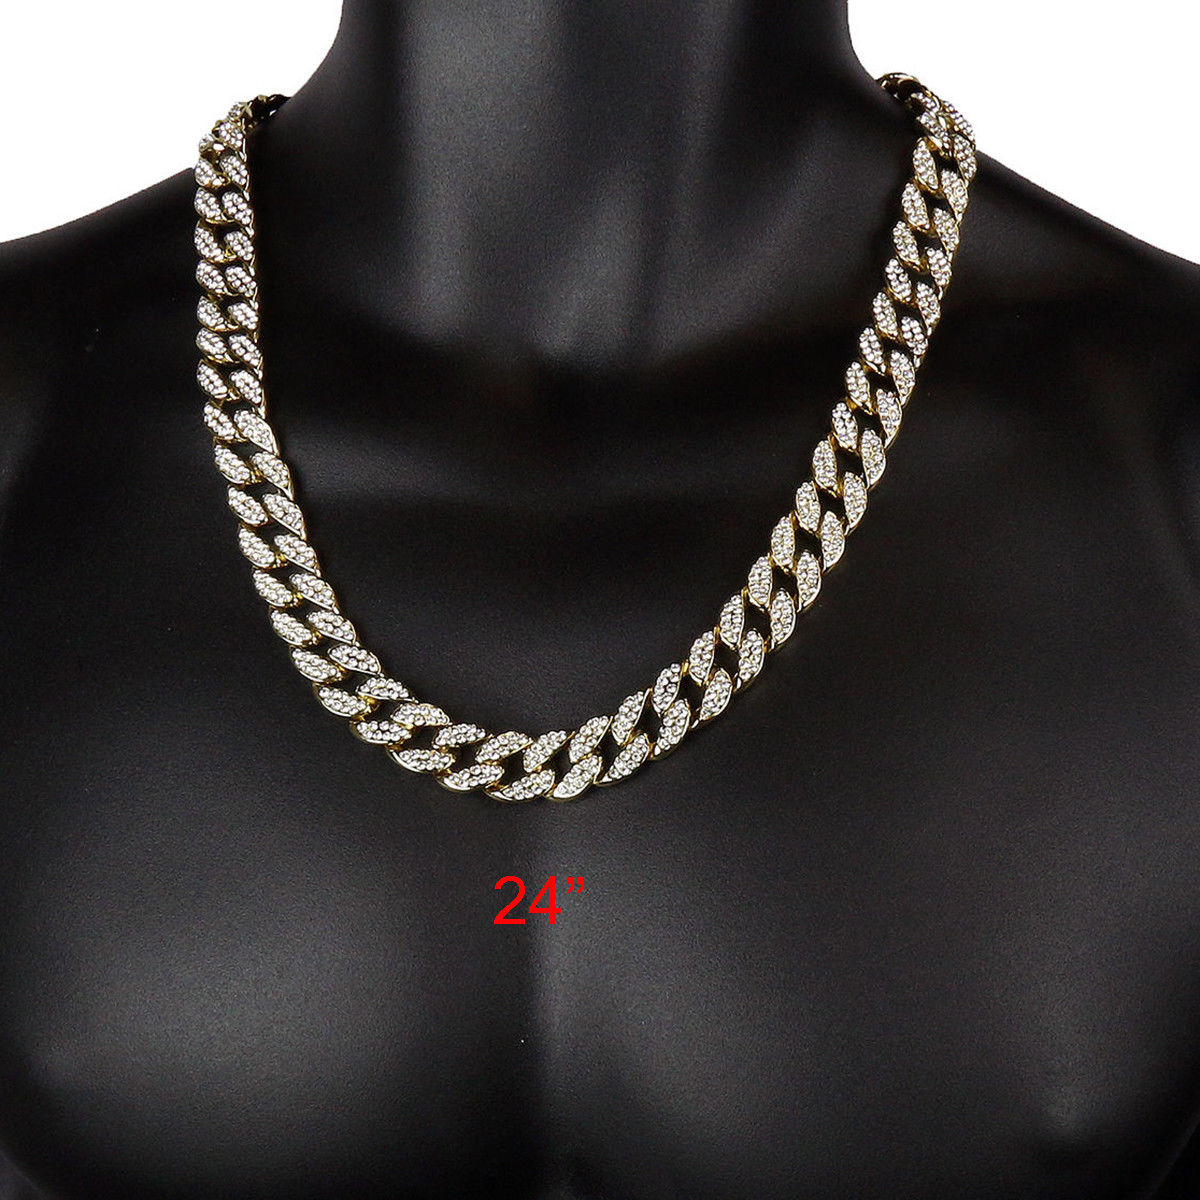 Real Gold Filled Cuban FULLY Cz Chain Necklace 15mm 24" Inches